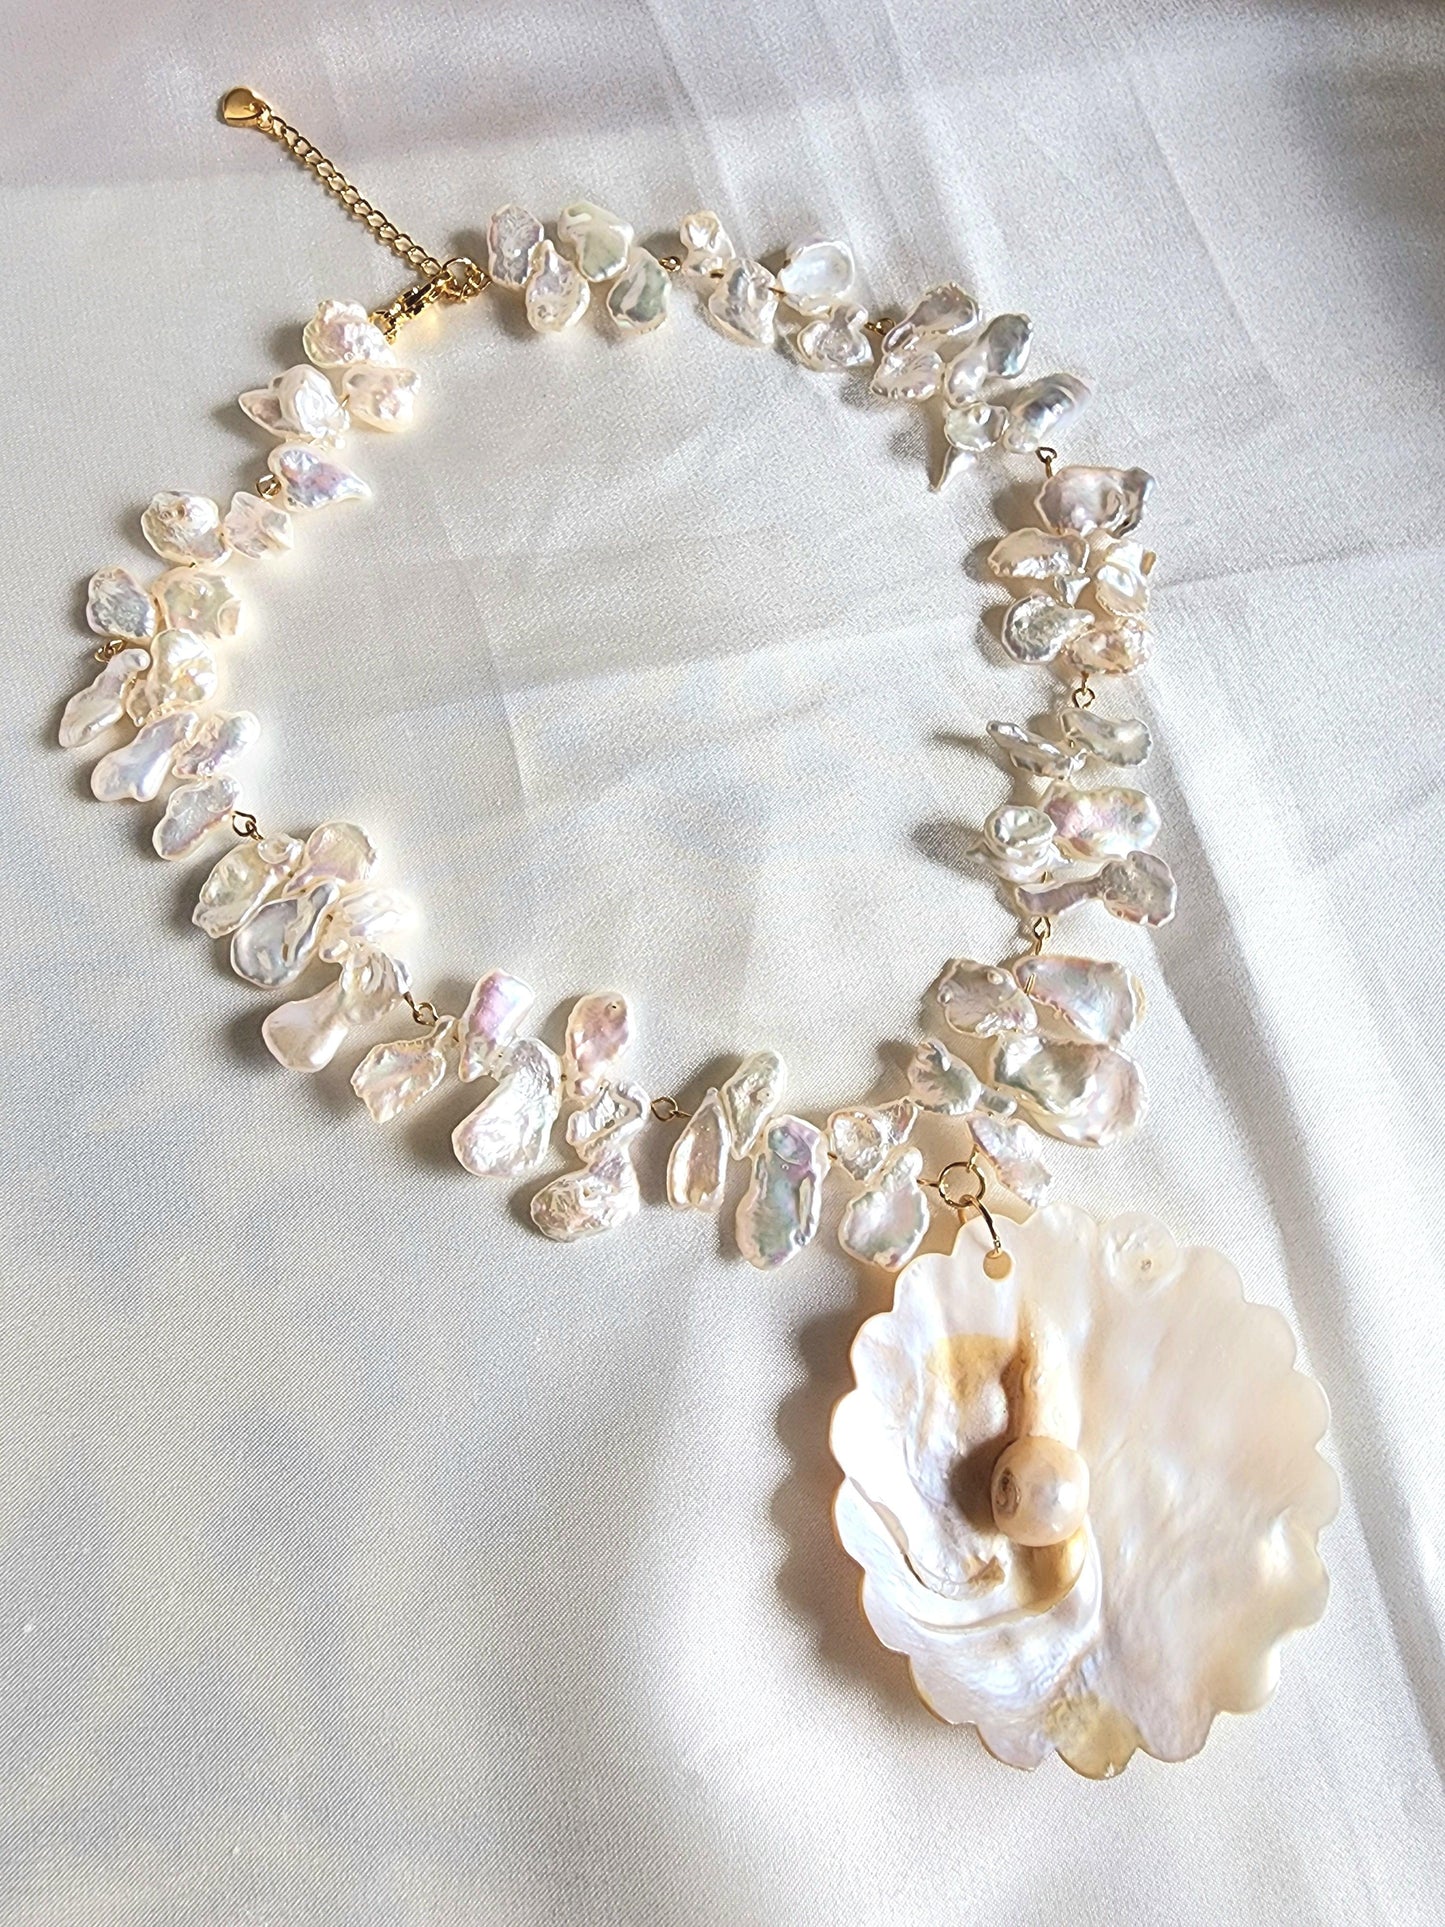 Treasure of the Sea Necklace - By Cocoyu